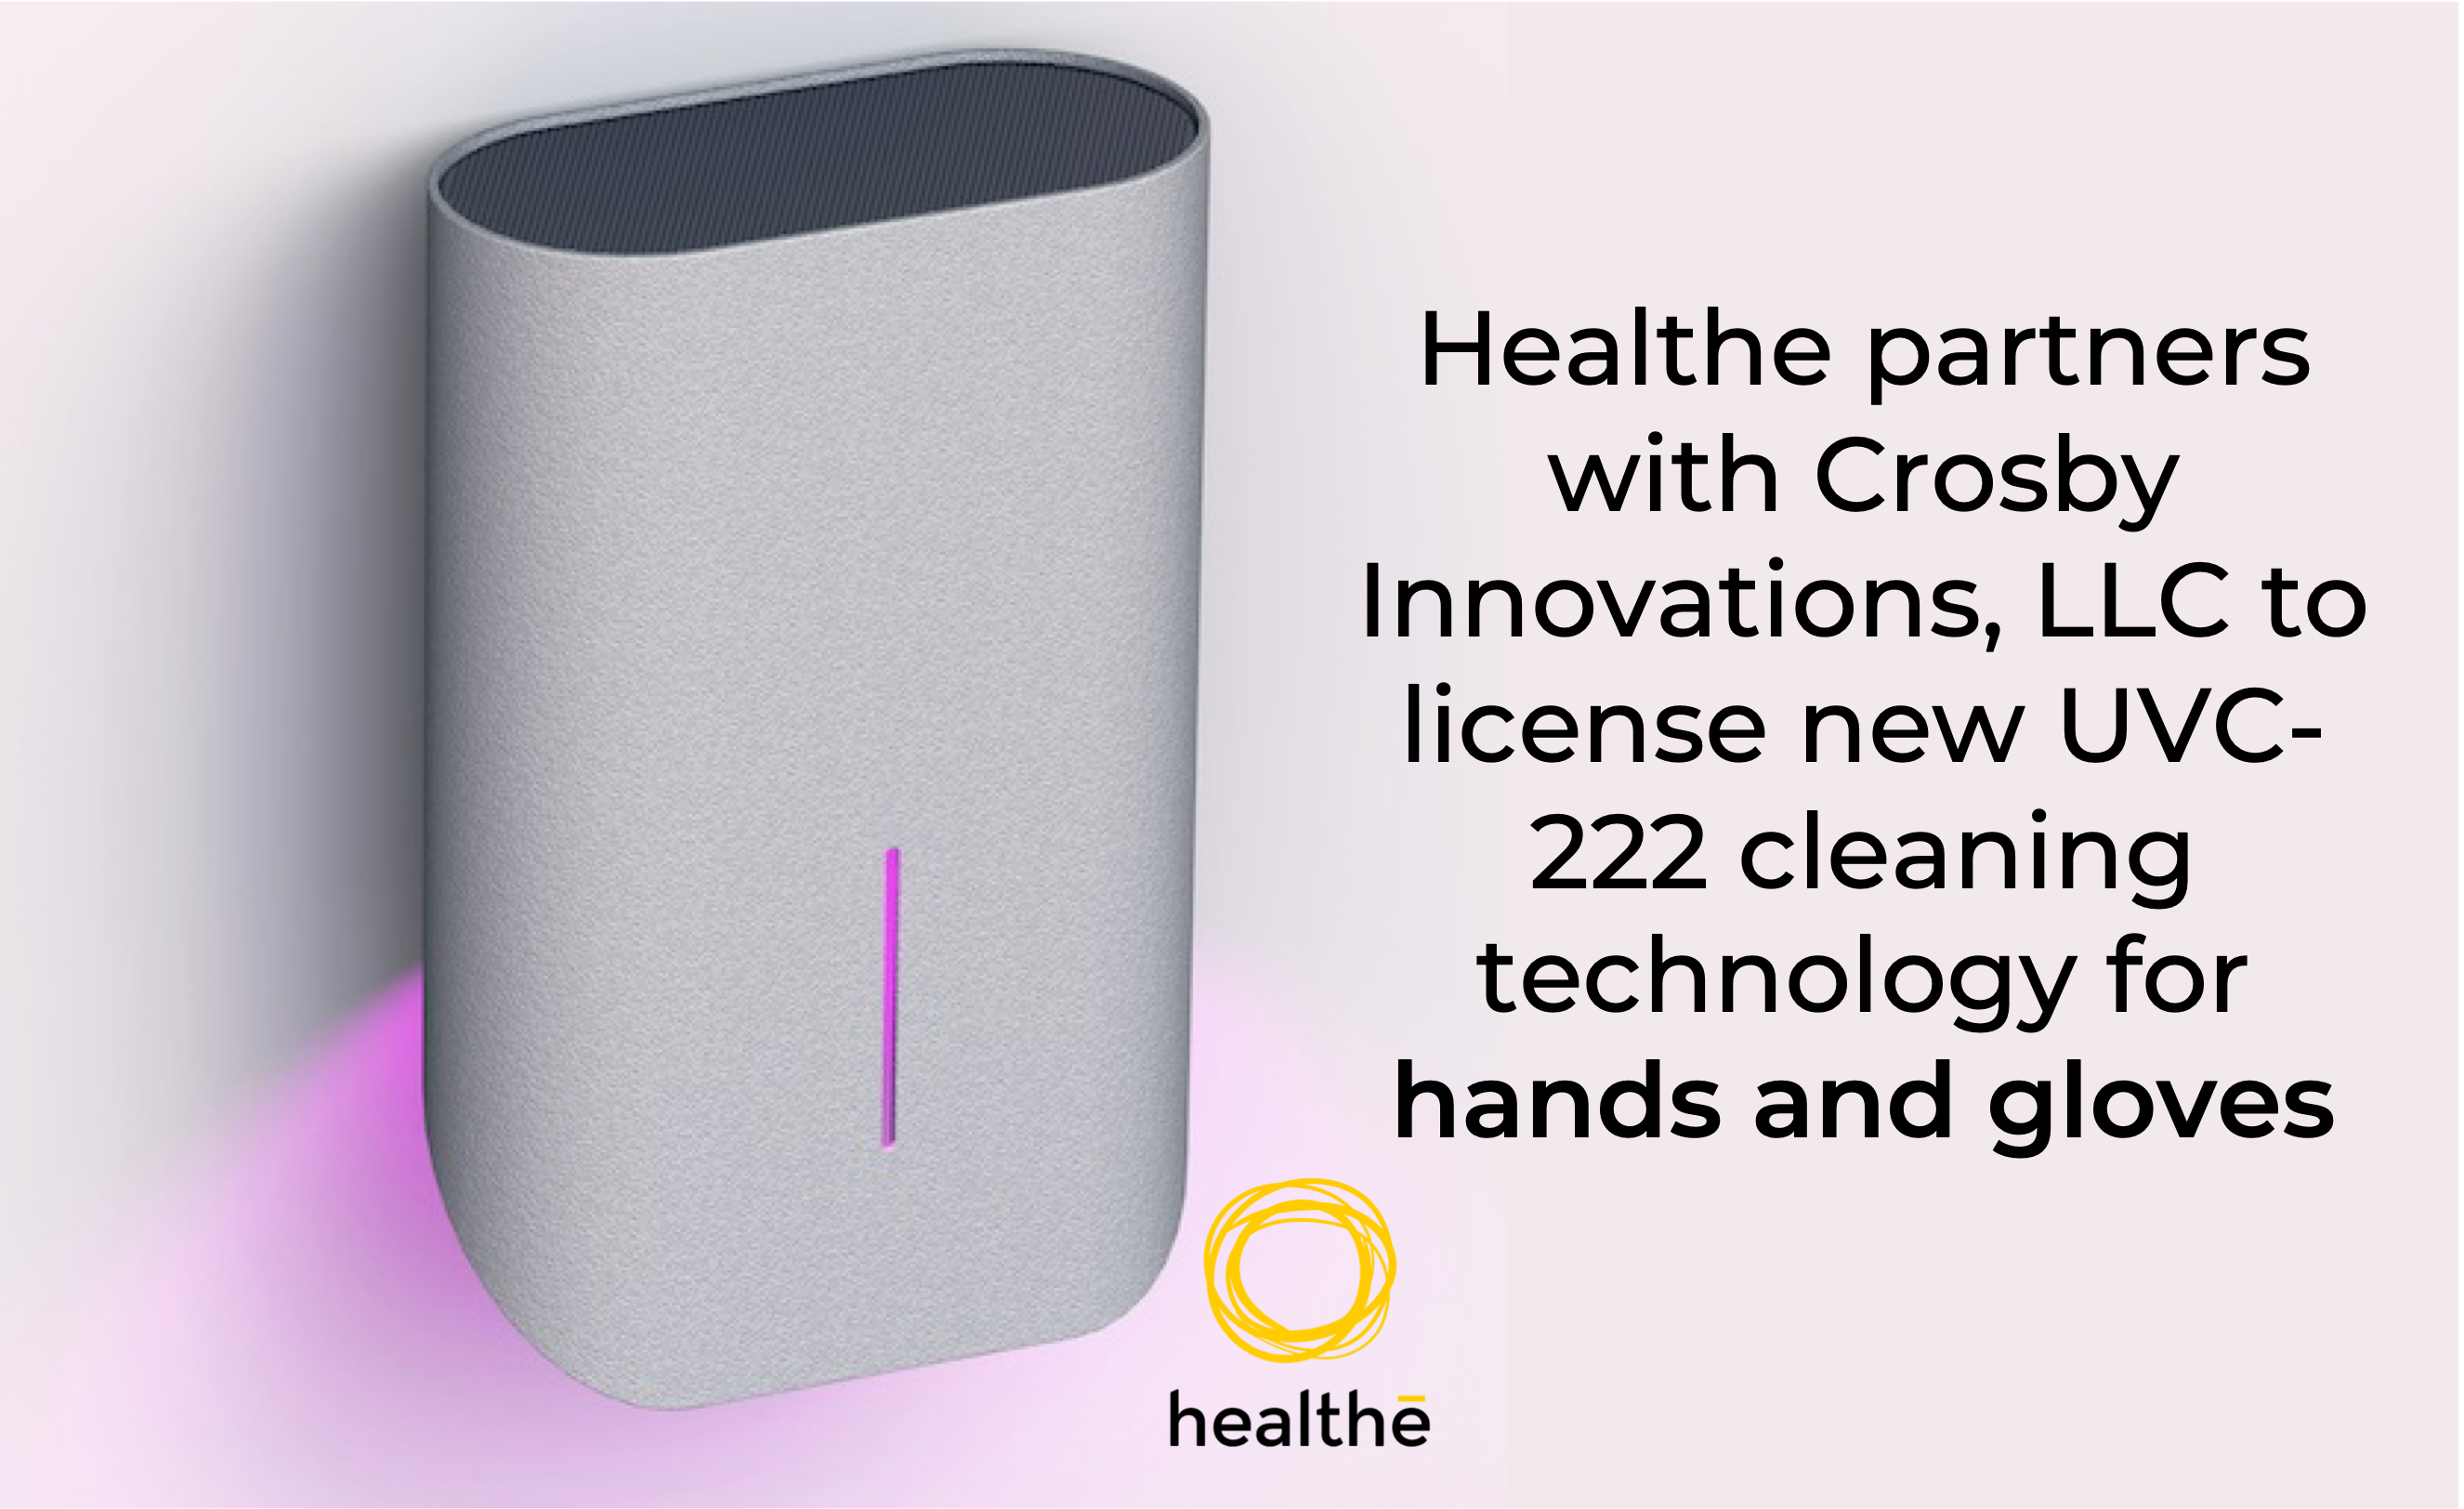 Healthe Inc.®, the global leader in UVC and human-centric lighting solutions, announced today that it has entered into a patent and technology license partnership with Crosby Innovations, LLC.  Under the terms of the agreement, Healthe Inc. will manufacture a state-of-the-art UVC 222nm cleaning device which will cleanse hands or gloves of viruses and bacteria. This groundbreaking solution is expected to be available for commercial sale beginning in late Q4.